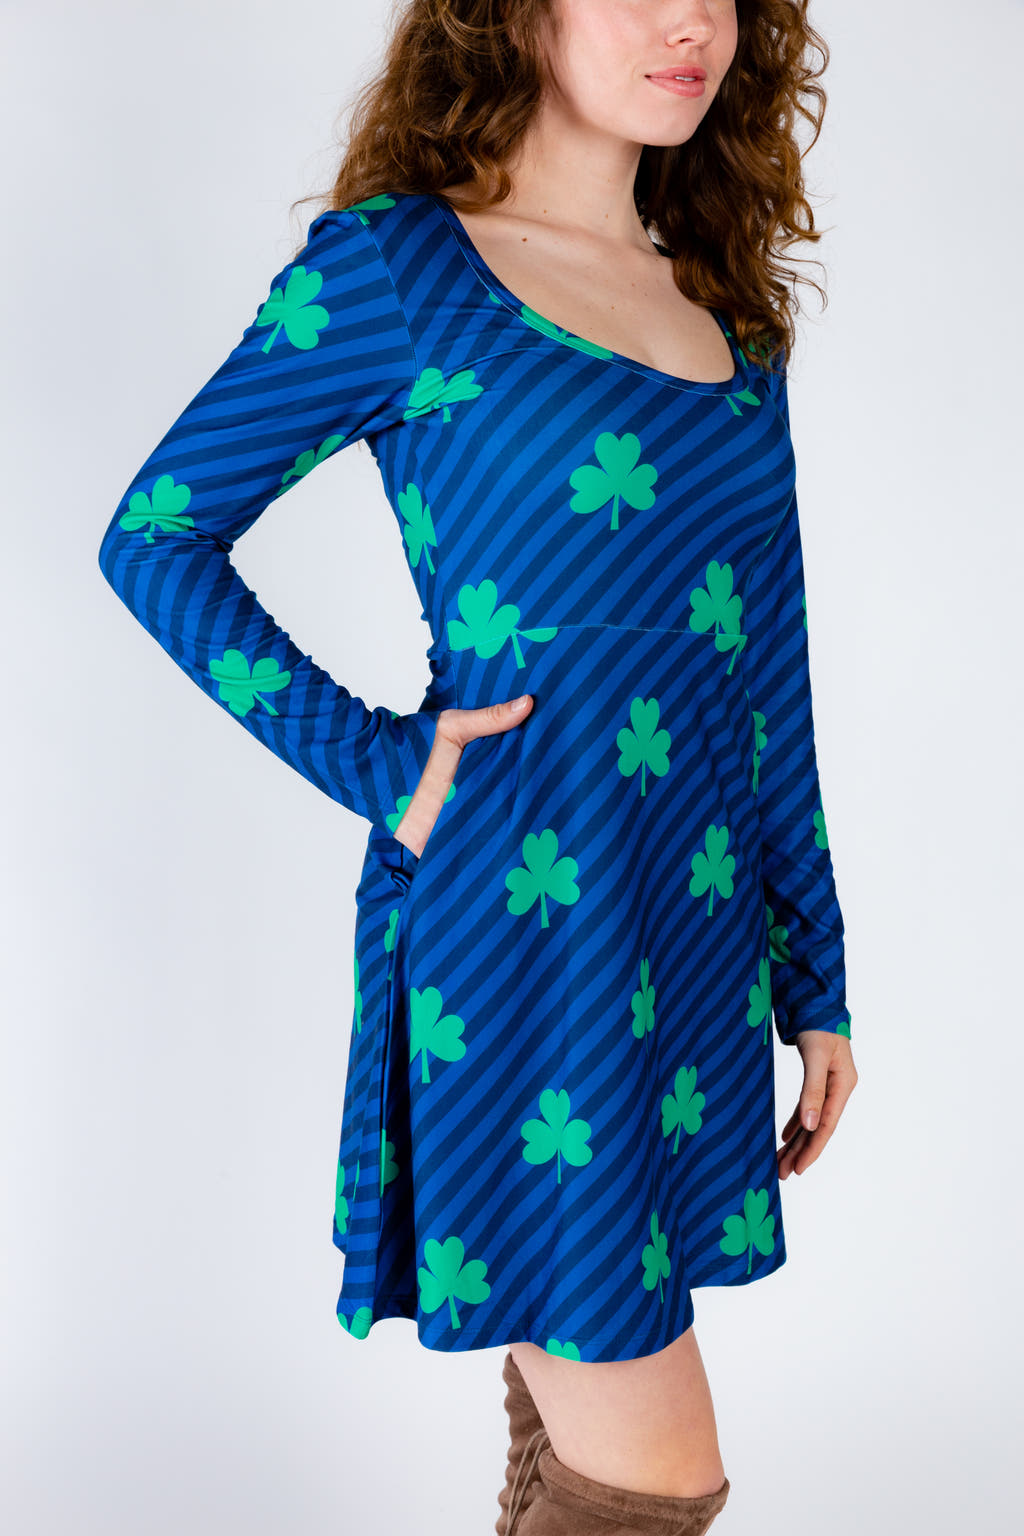 Green and navy shamrock dress for ladies